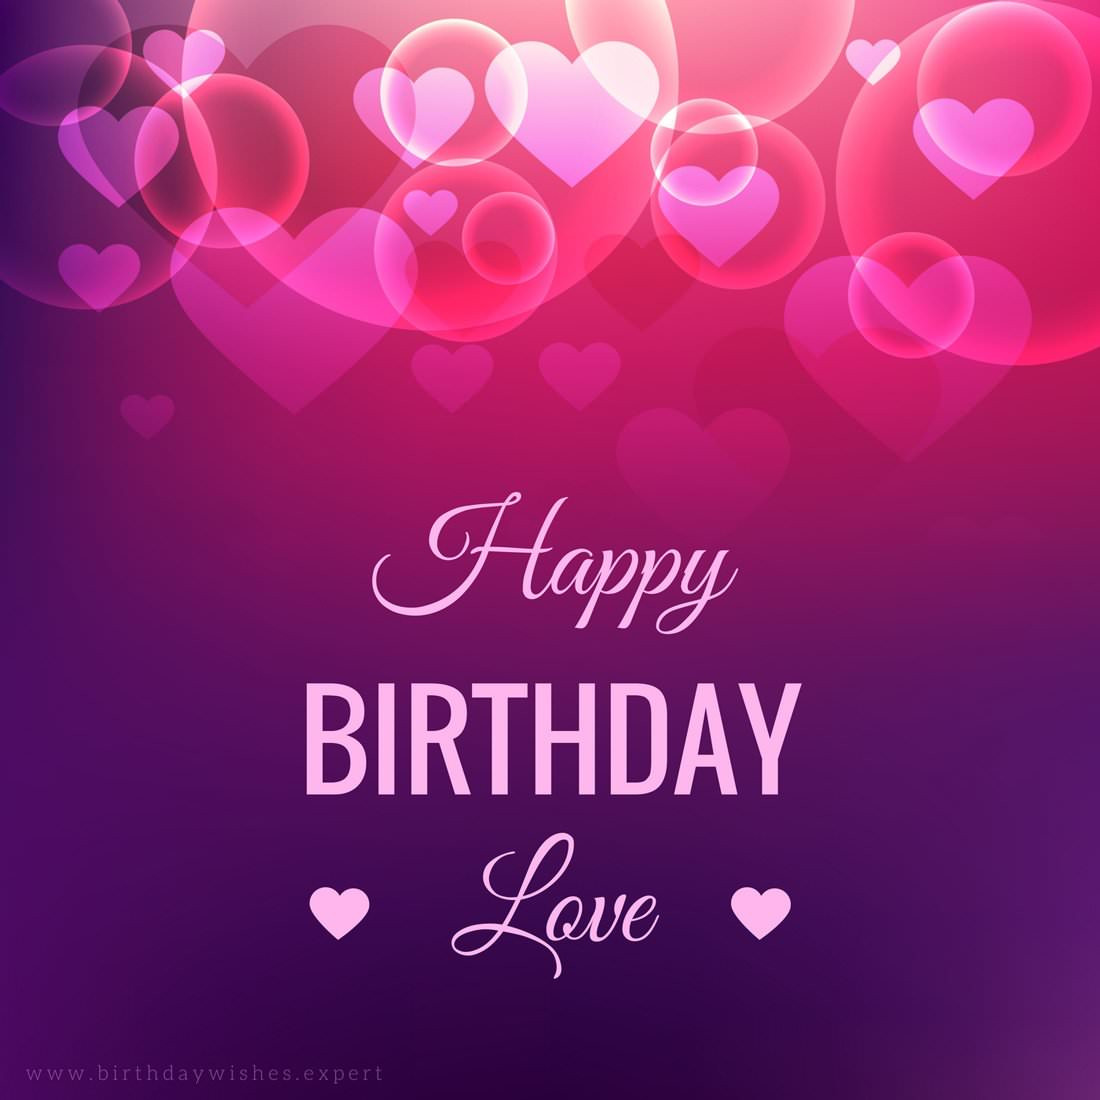 Happy Birthday Boyfriend Quotes
 Smart Funny and Sweet Birthday Wishes for your Boyfriend